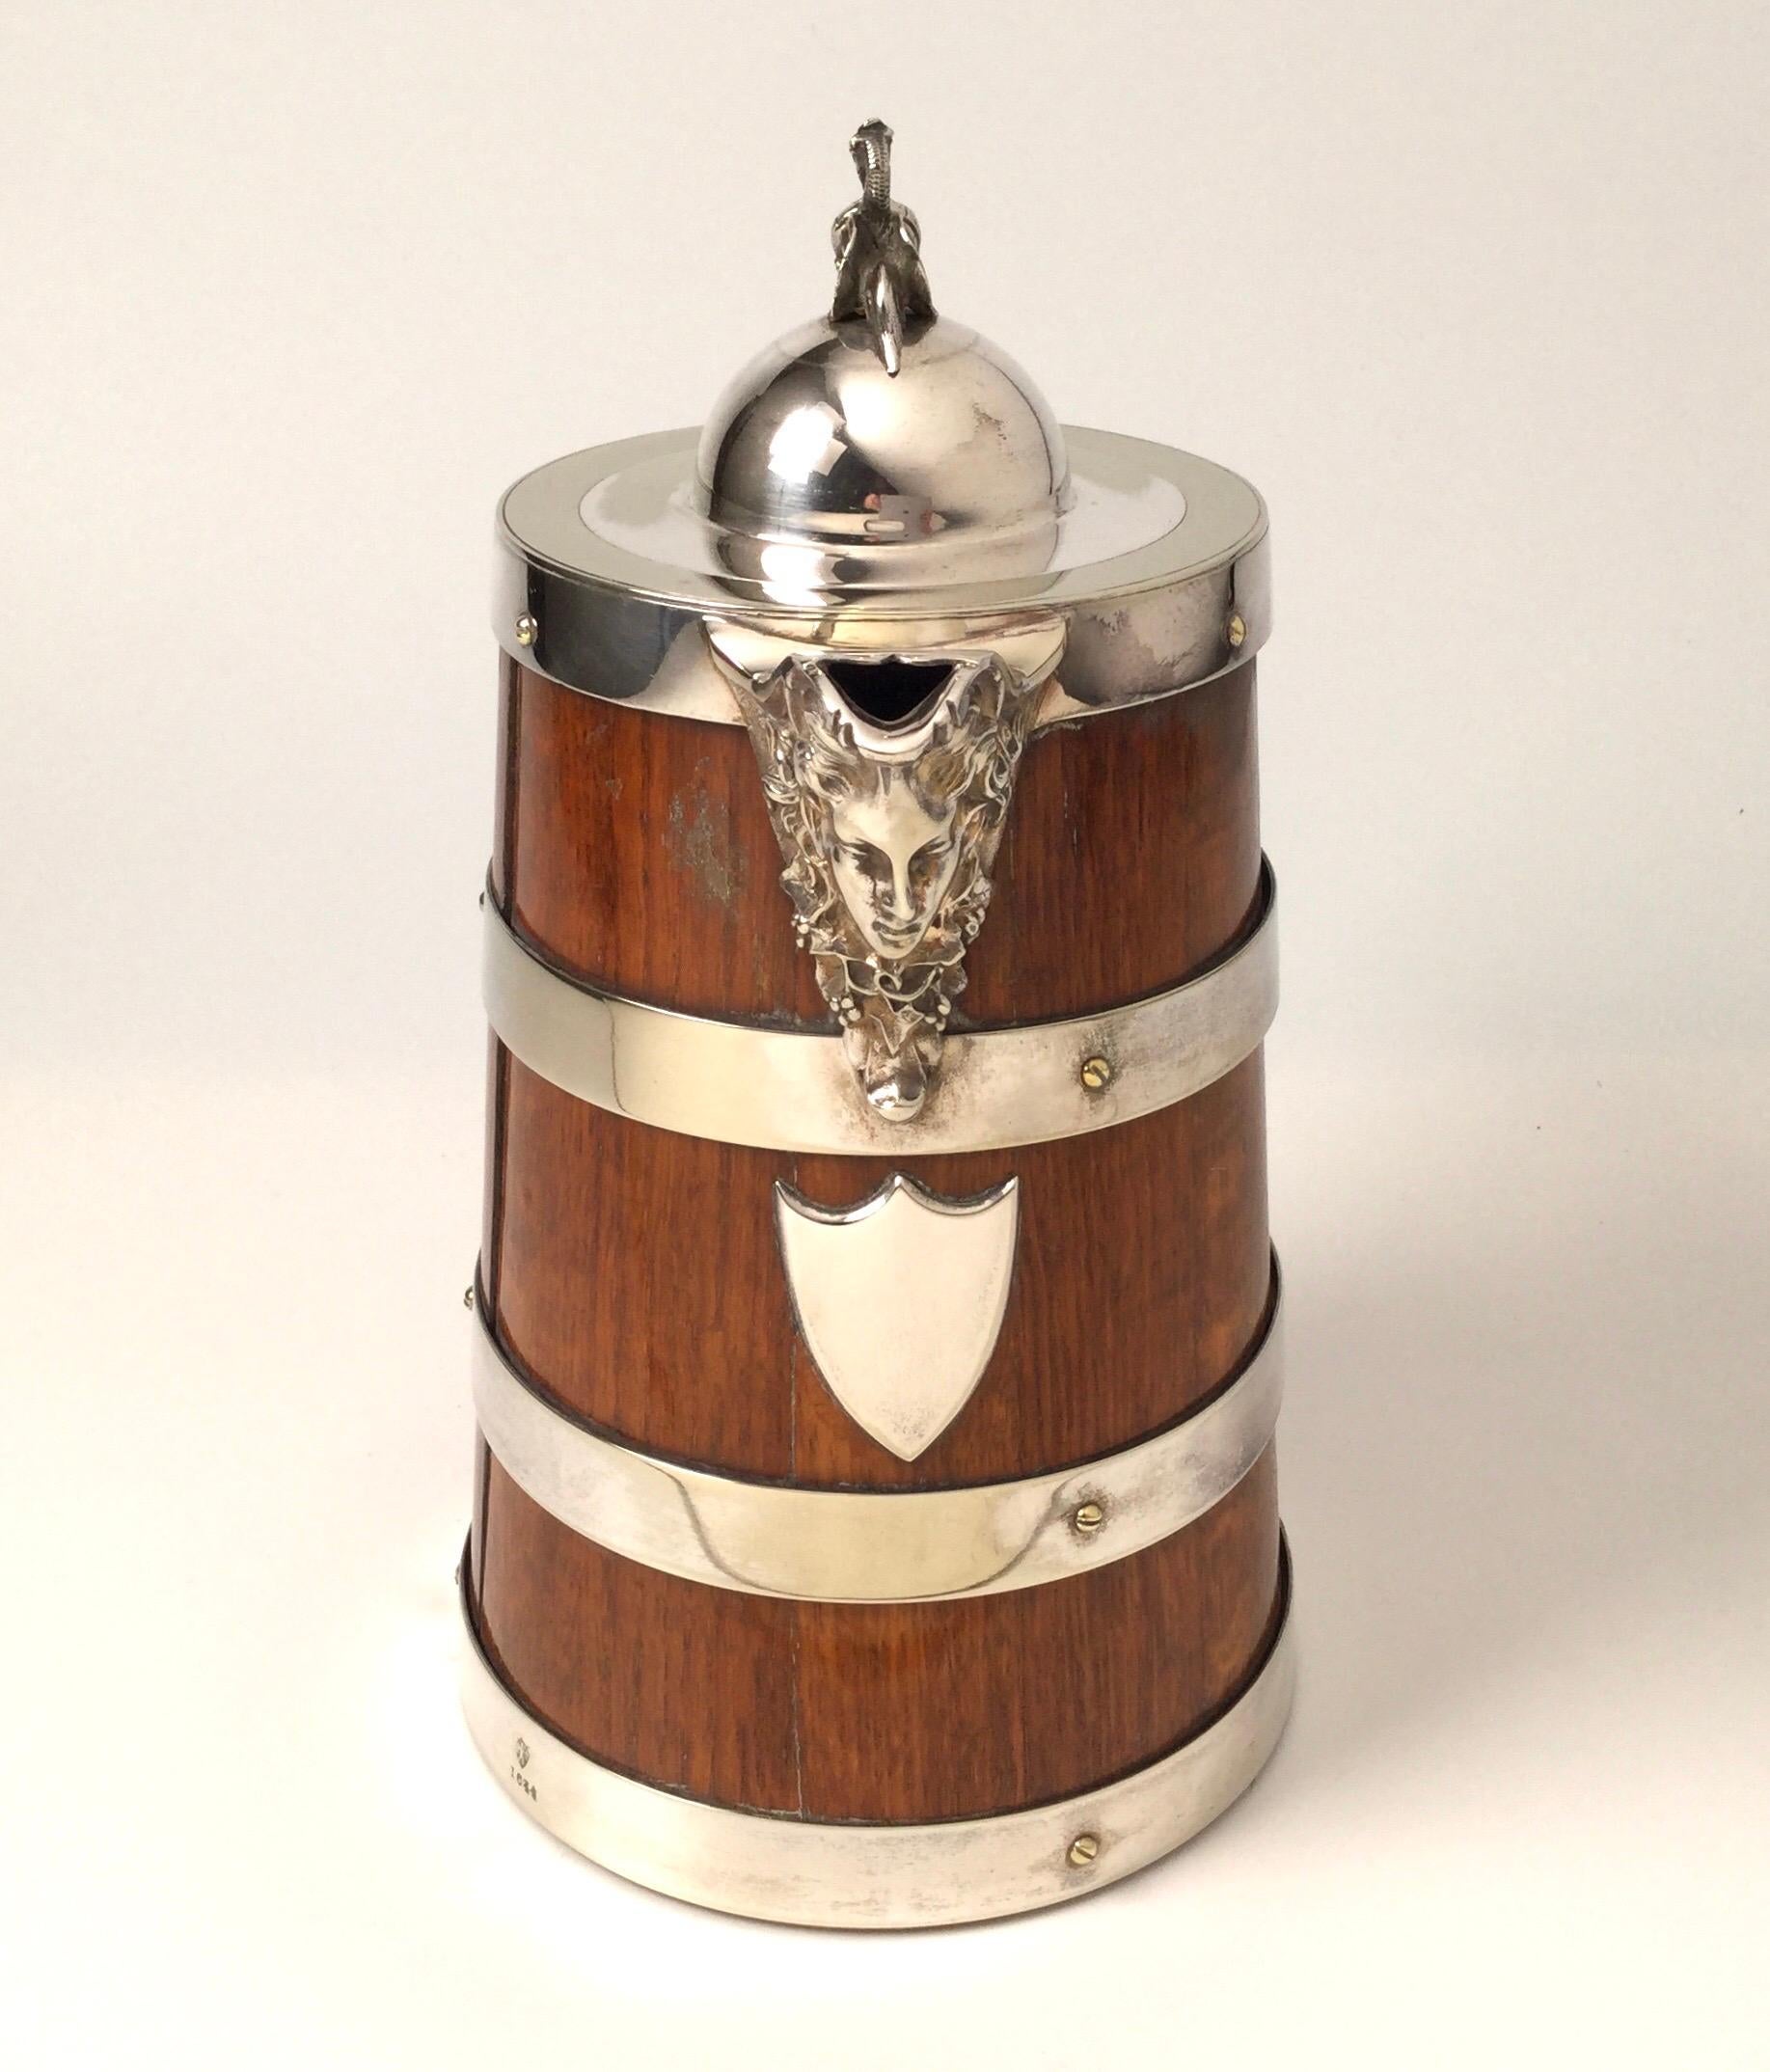 Handsome 19th century Tankard in oak with silver plated bands. The makers mark is John Grinsel & Sons. The handle with a detailed female ships figure and the spout with a figural mask. We also have a larger on that is also posted. This tankard is 10